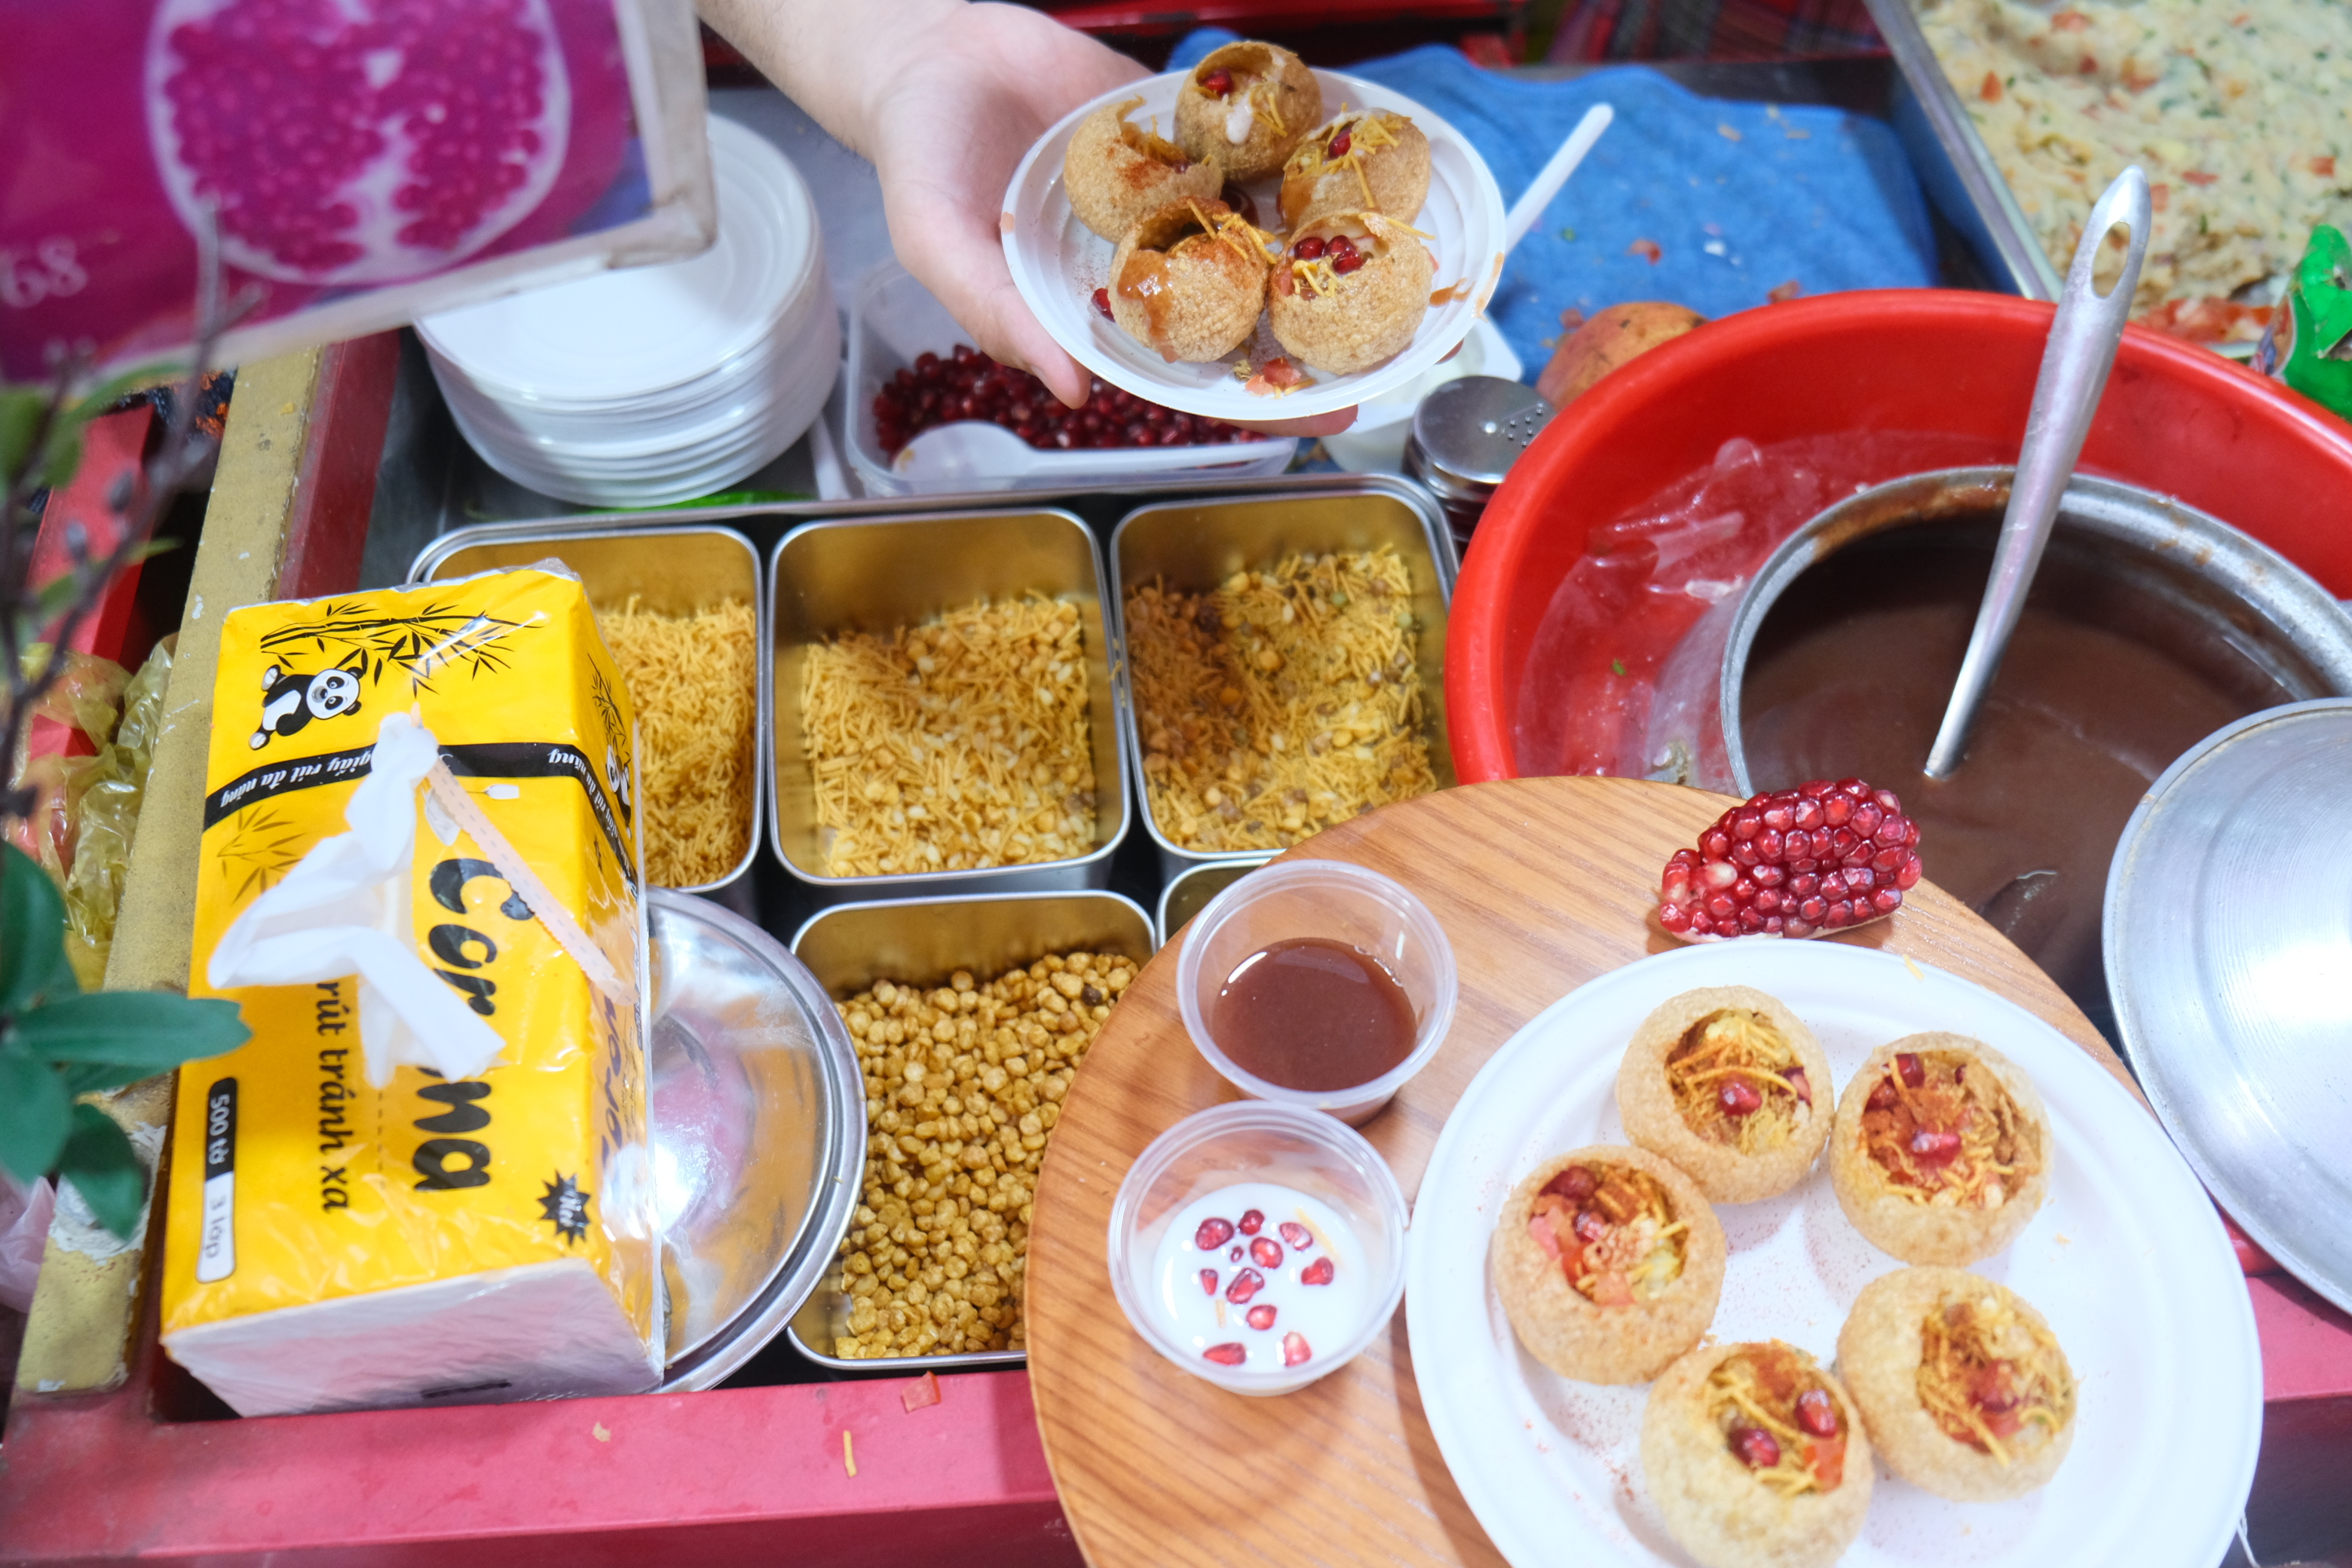 All the spices used to make panipuri at Hung's stall are said to be imported from India. Photo: Ngoc Phuong / Tuoi Tre News